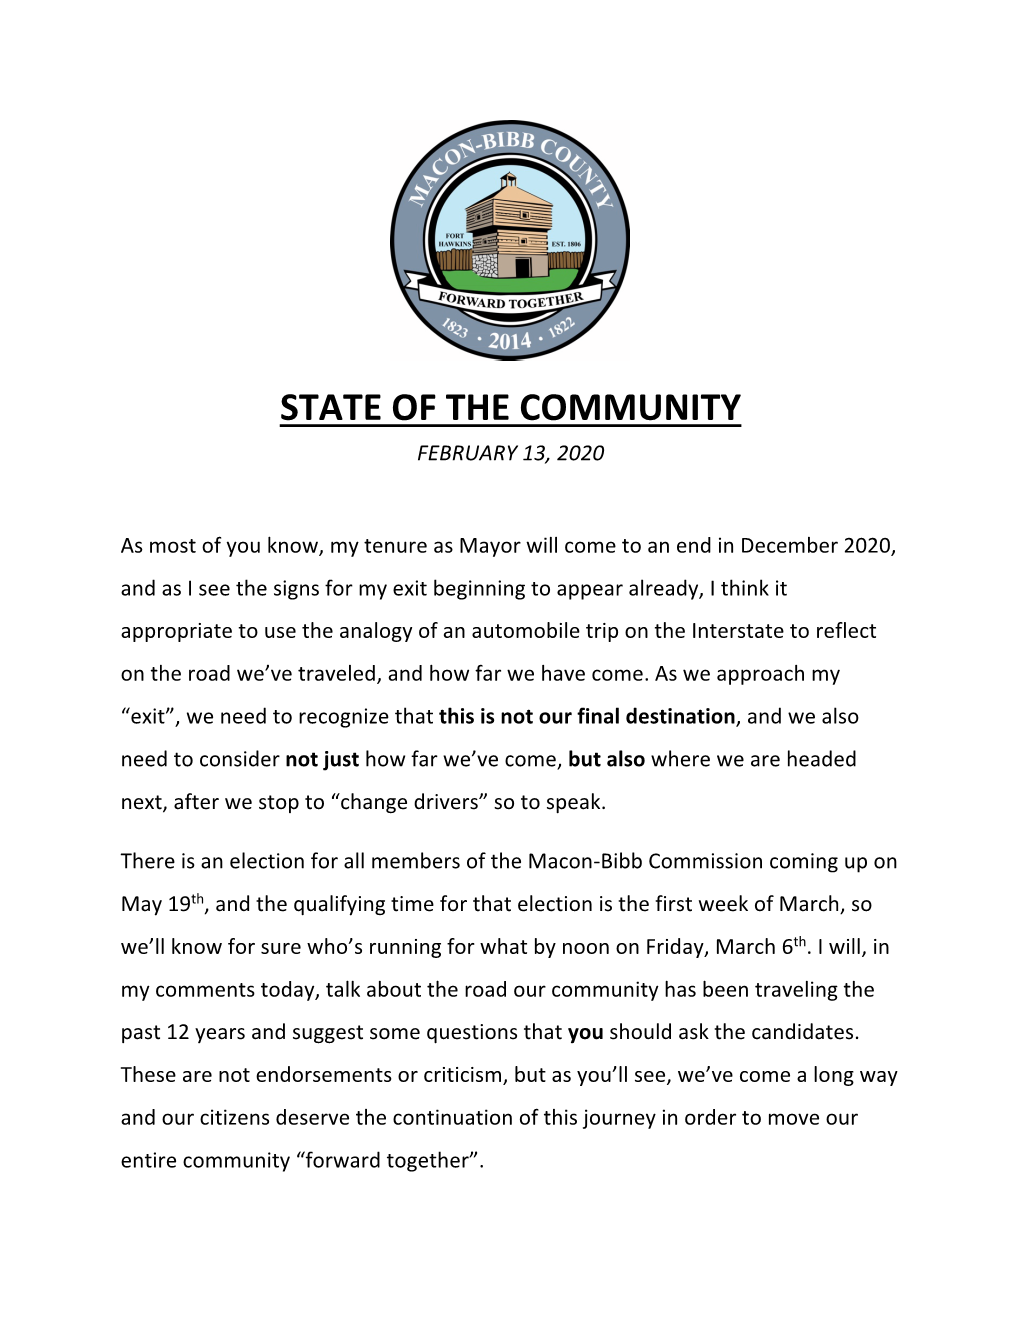 State of the Community February 13, 2020